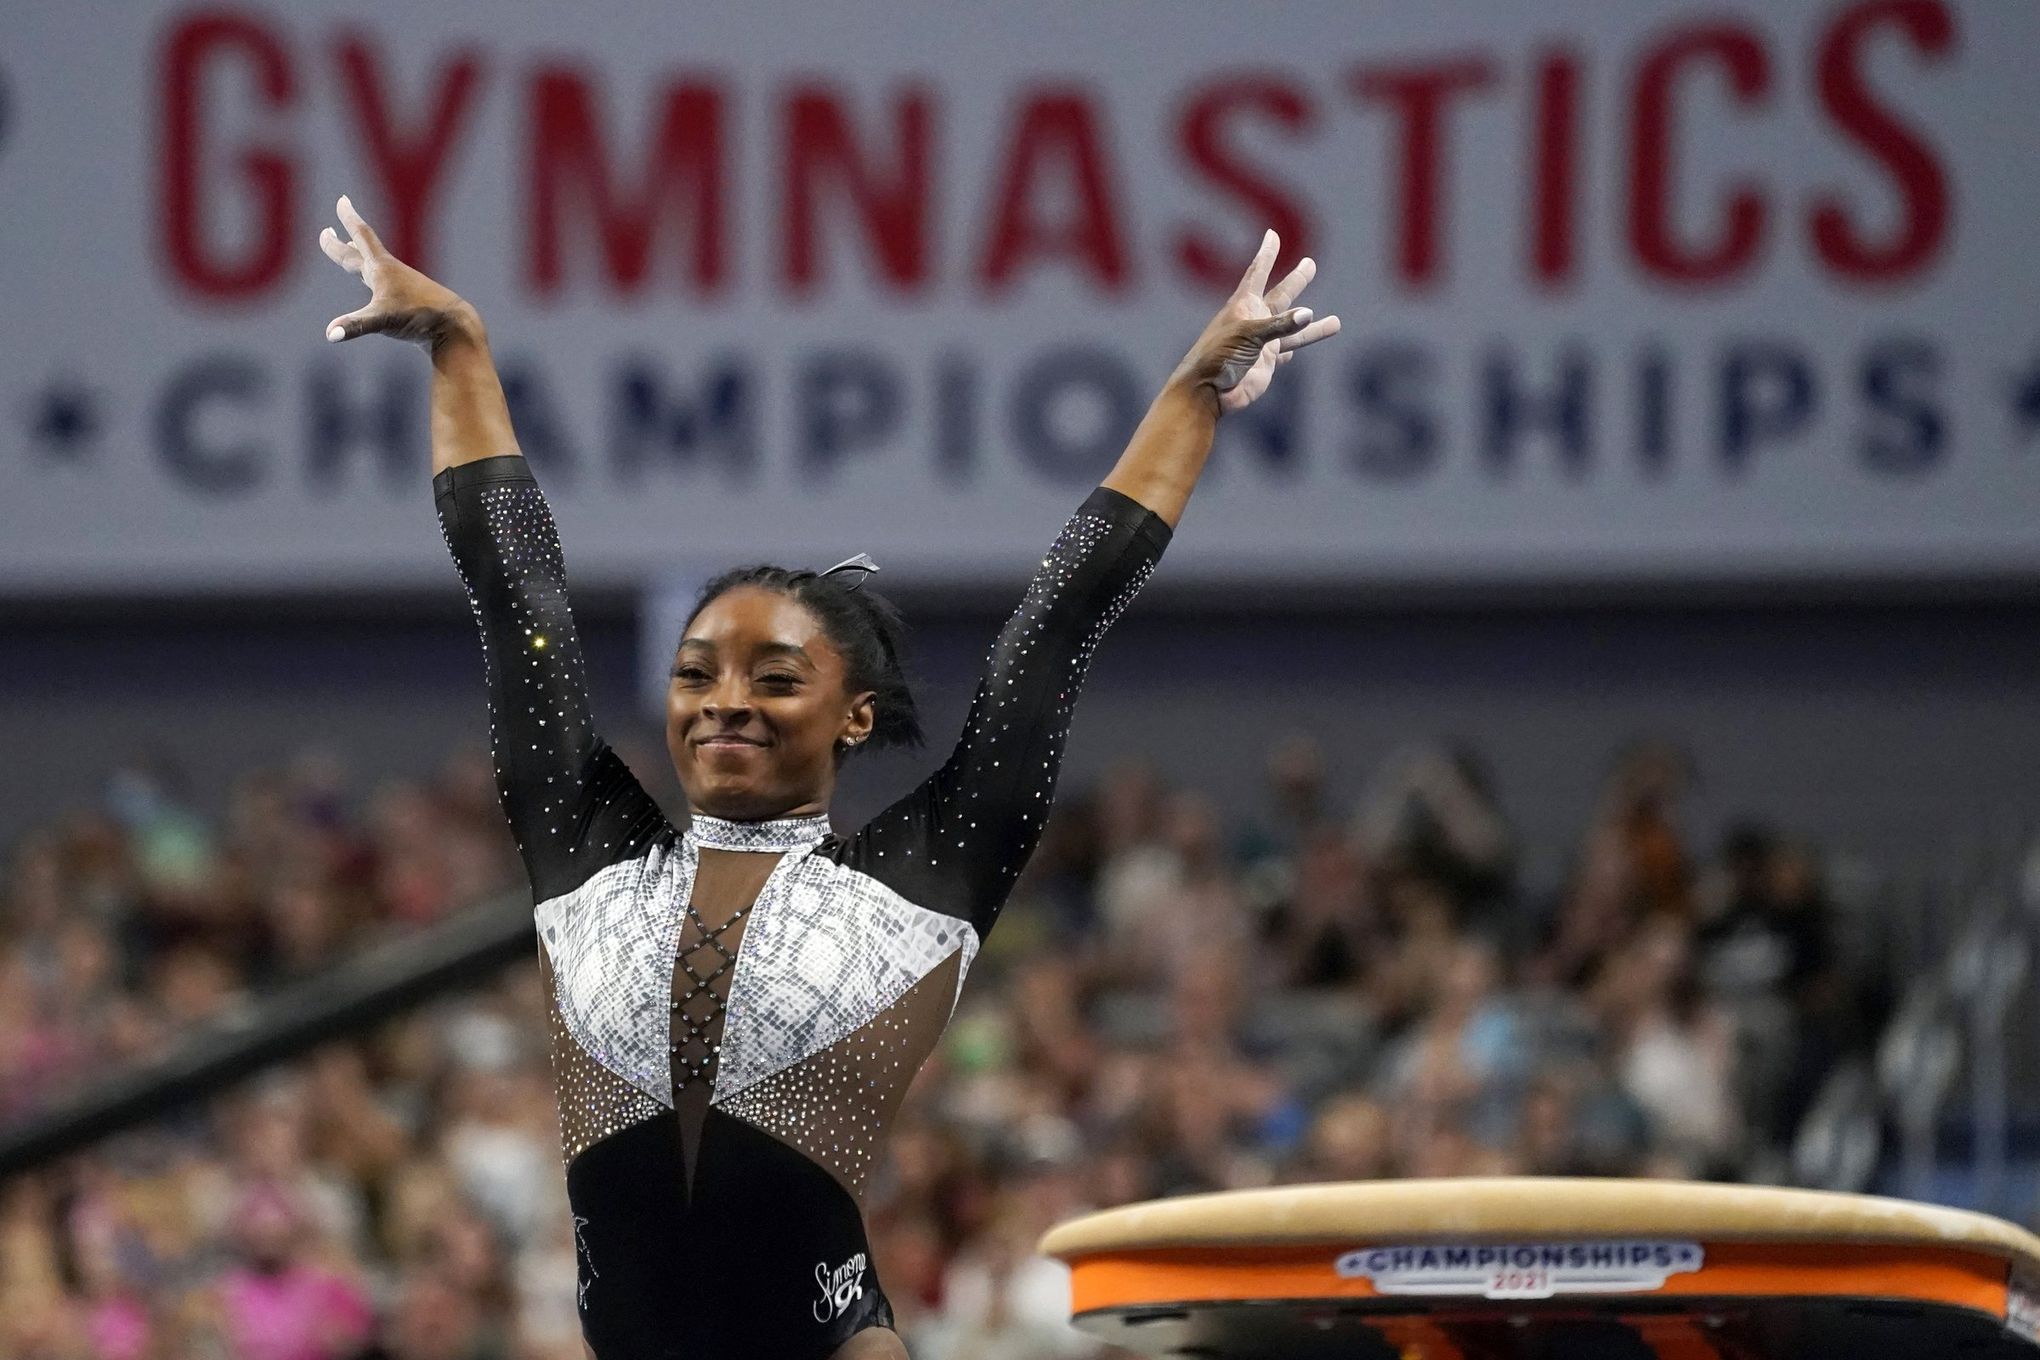 Simone Biles not competing at Winter Cup gymnastics meet